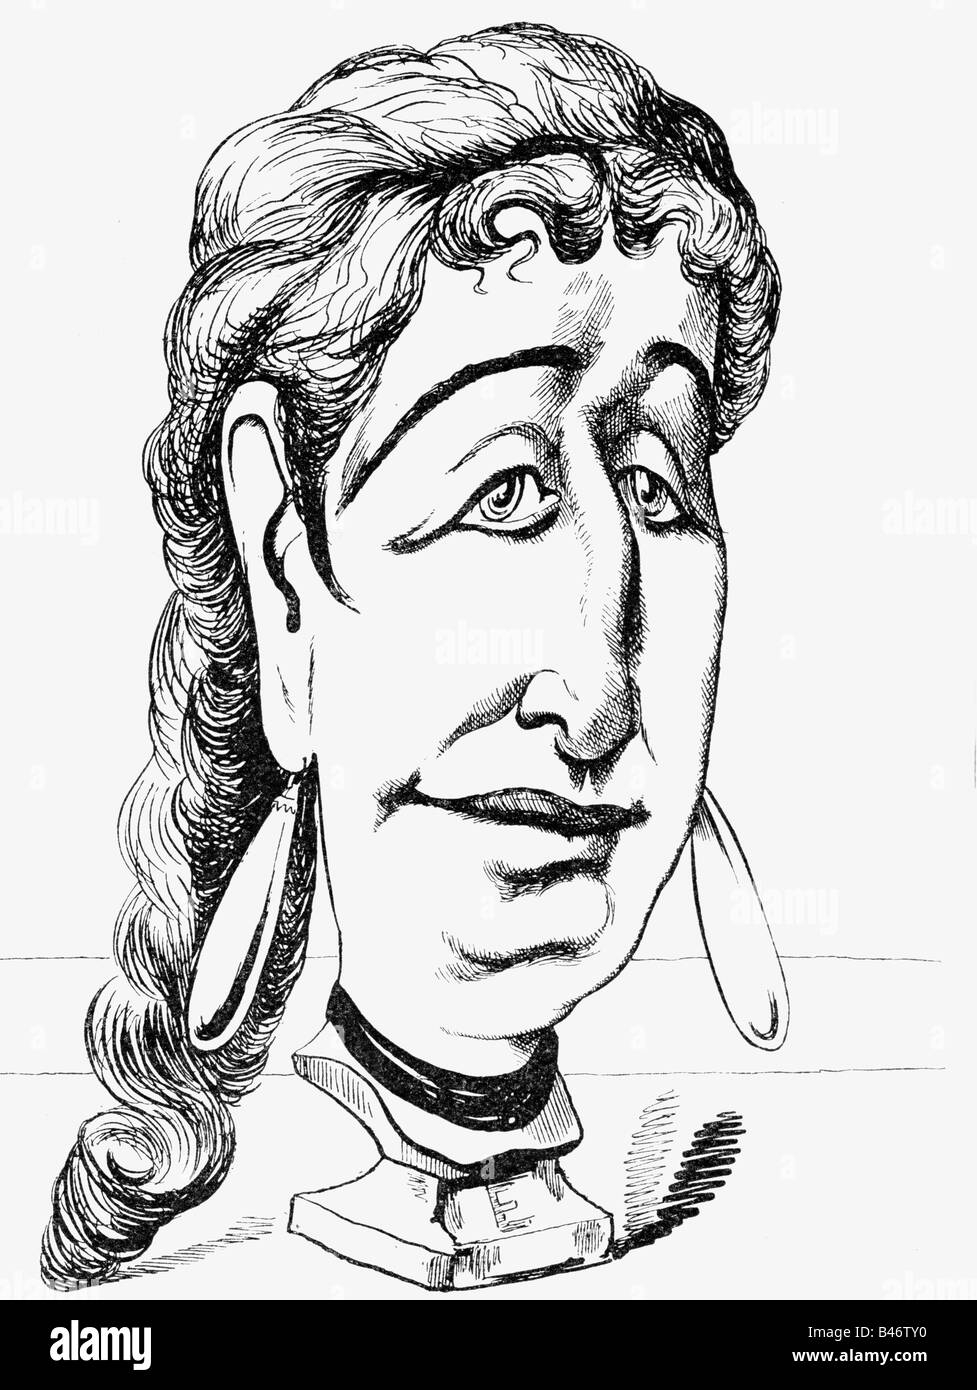 Eugenie, 5.5.1826 - 11.7.1920, Empress Consort of France 30.1.1853 - 4.9.1870, caricature, 'Wax figure: Madame!', wood engraving after drawing by Faustin, circa 1865, , Stock Photo